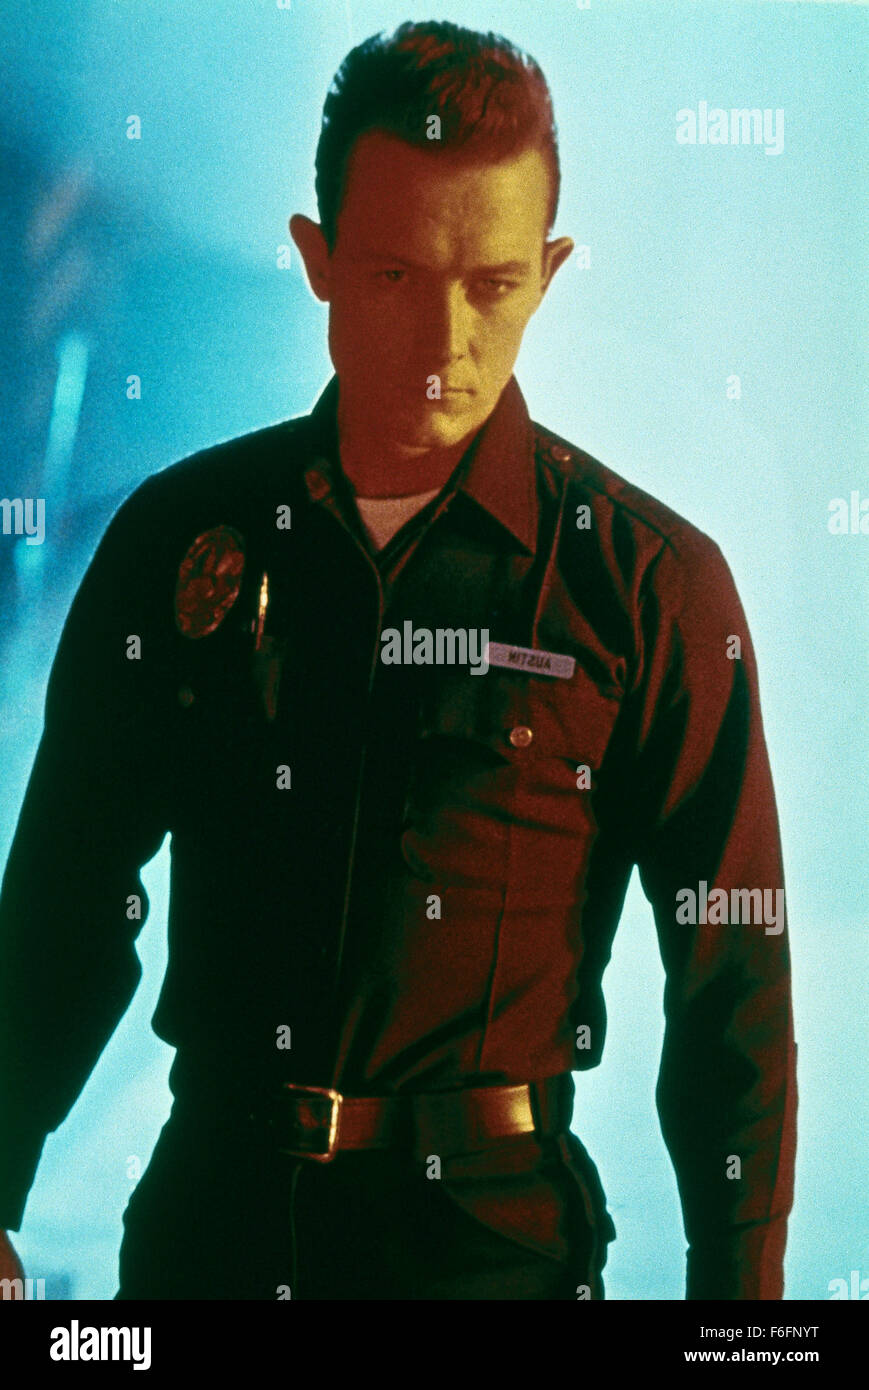 RELEASE DATE: July 3, 1991. MOVIE TITLE: Terminator 2: Judgment Day. STUDIO: TriStar Pictures. PLOT: The cyborg who once tried to kill Sarah Connor must now protect her teenage son, John Connor, from an even more powerful and advanced Terminator. PICTURED: ROBERT PATRICK as T-1000. Stock Photo